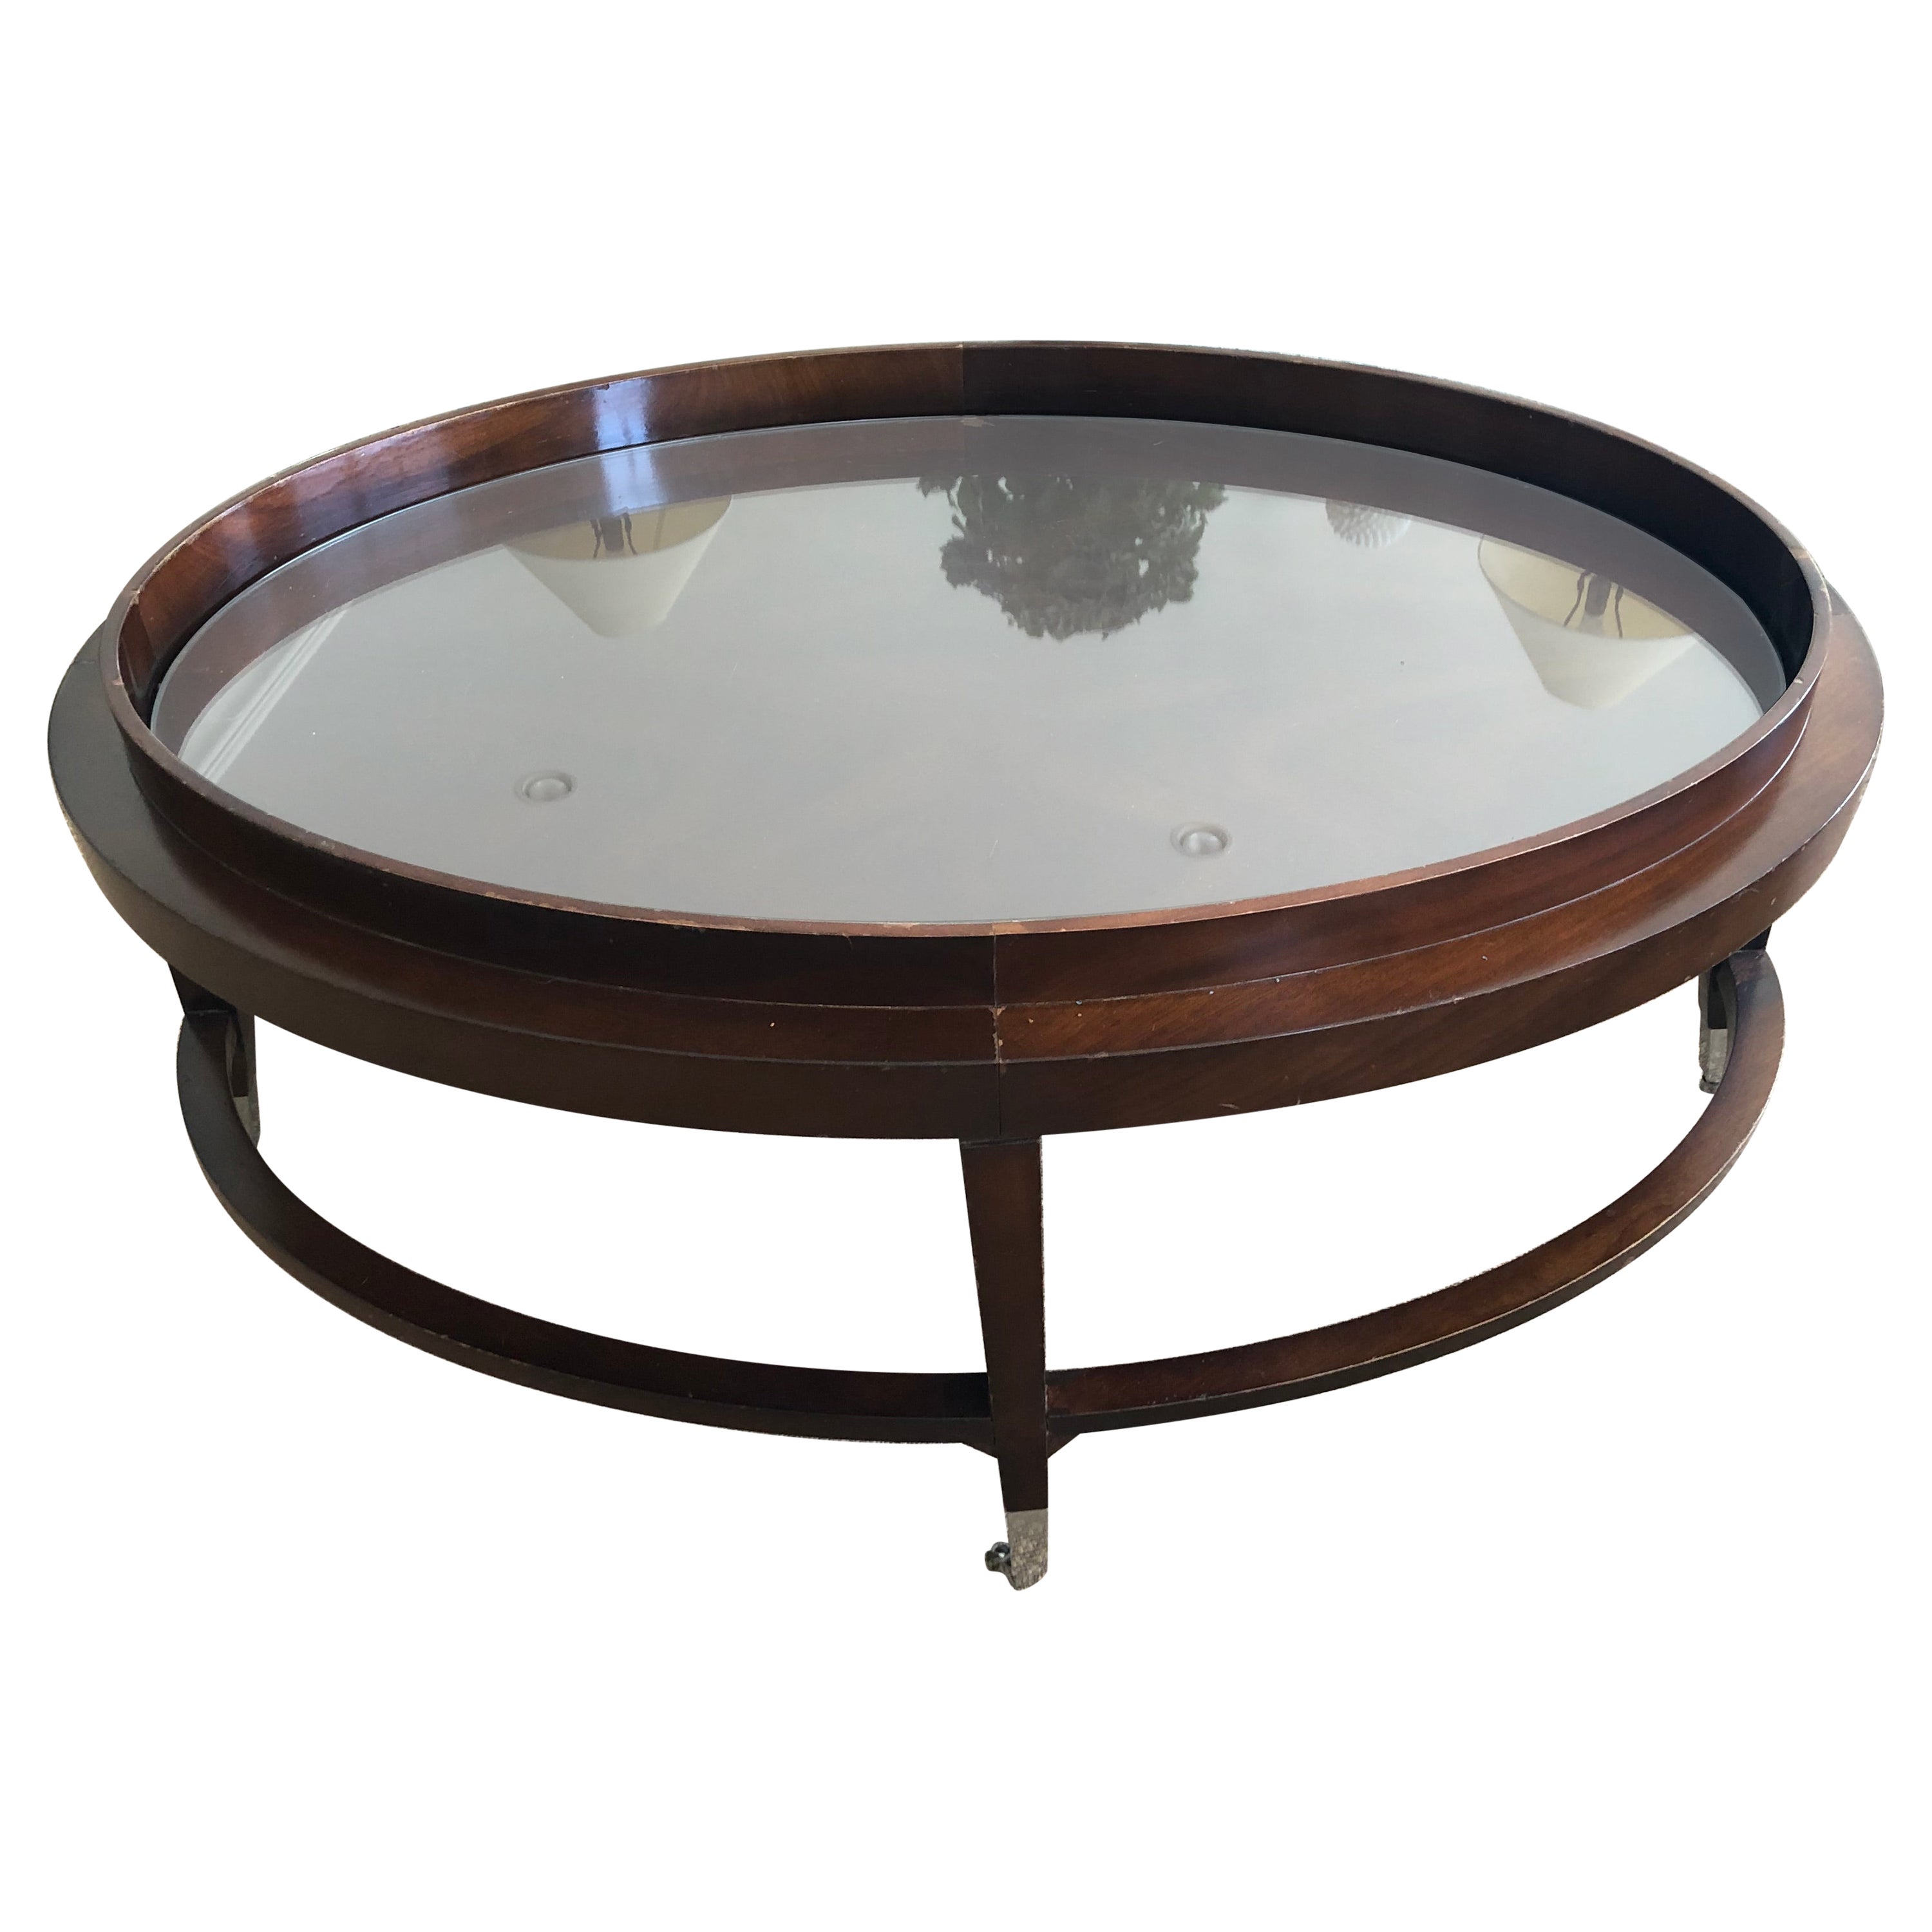 How do you style an oval coffee table?